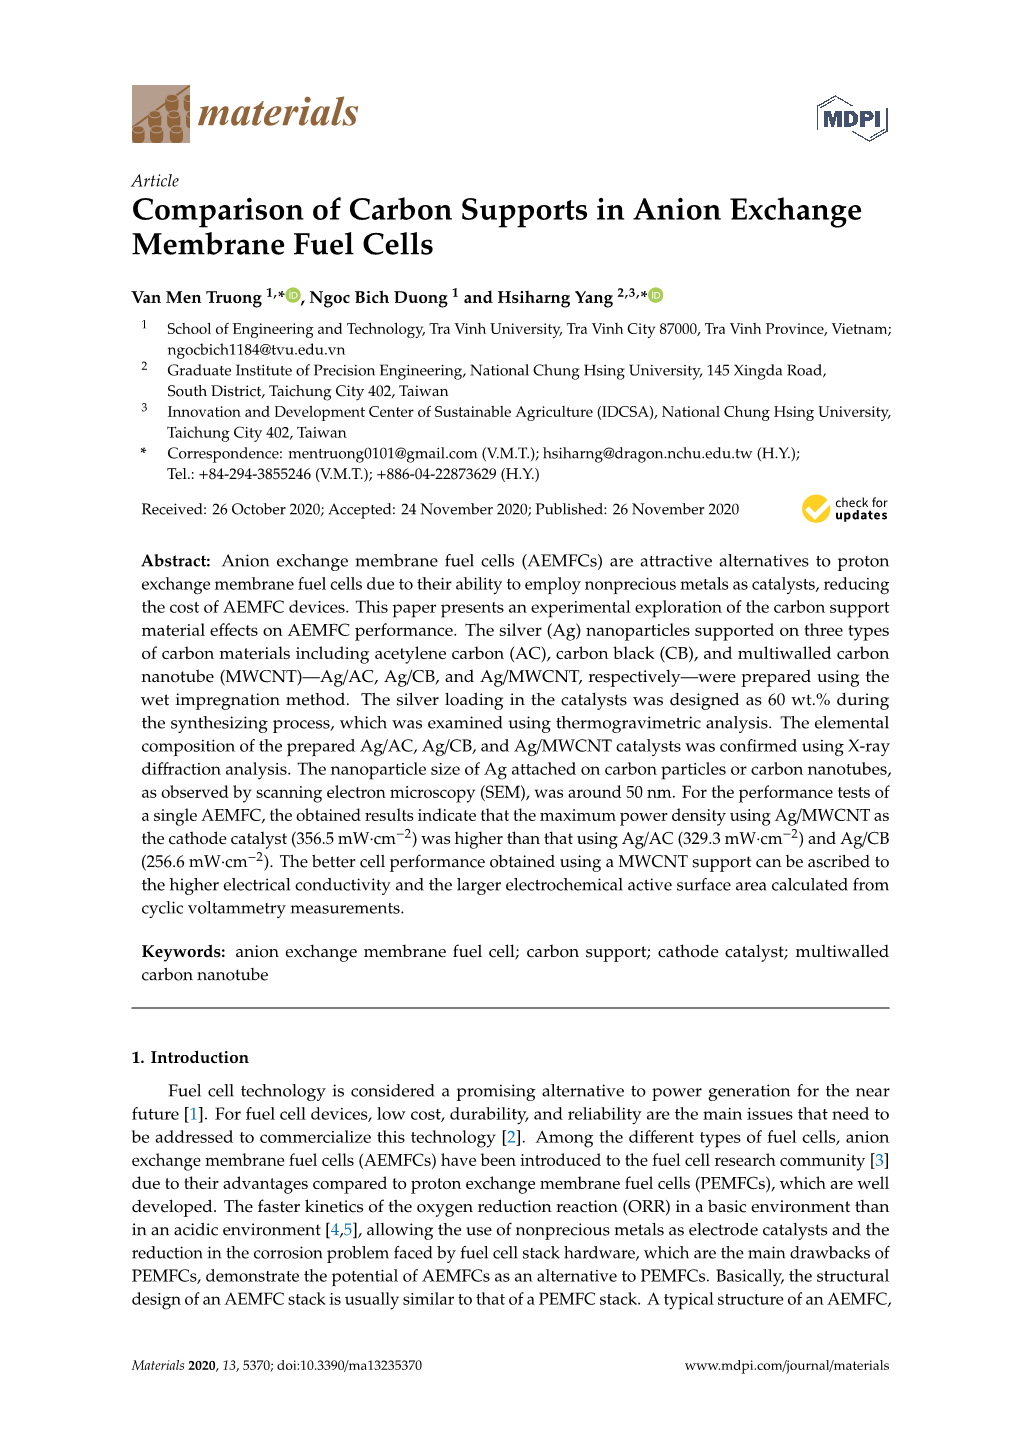 Comparison of Carbon Supports in Anion Exchange Membrane Fuel Cells